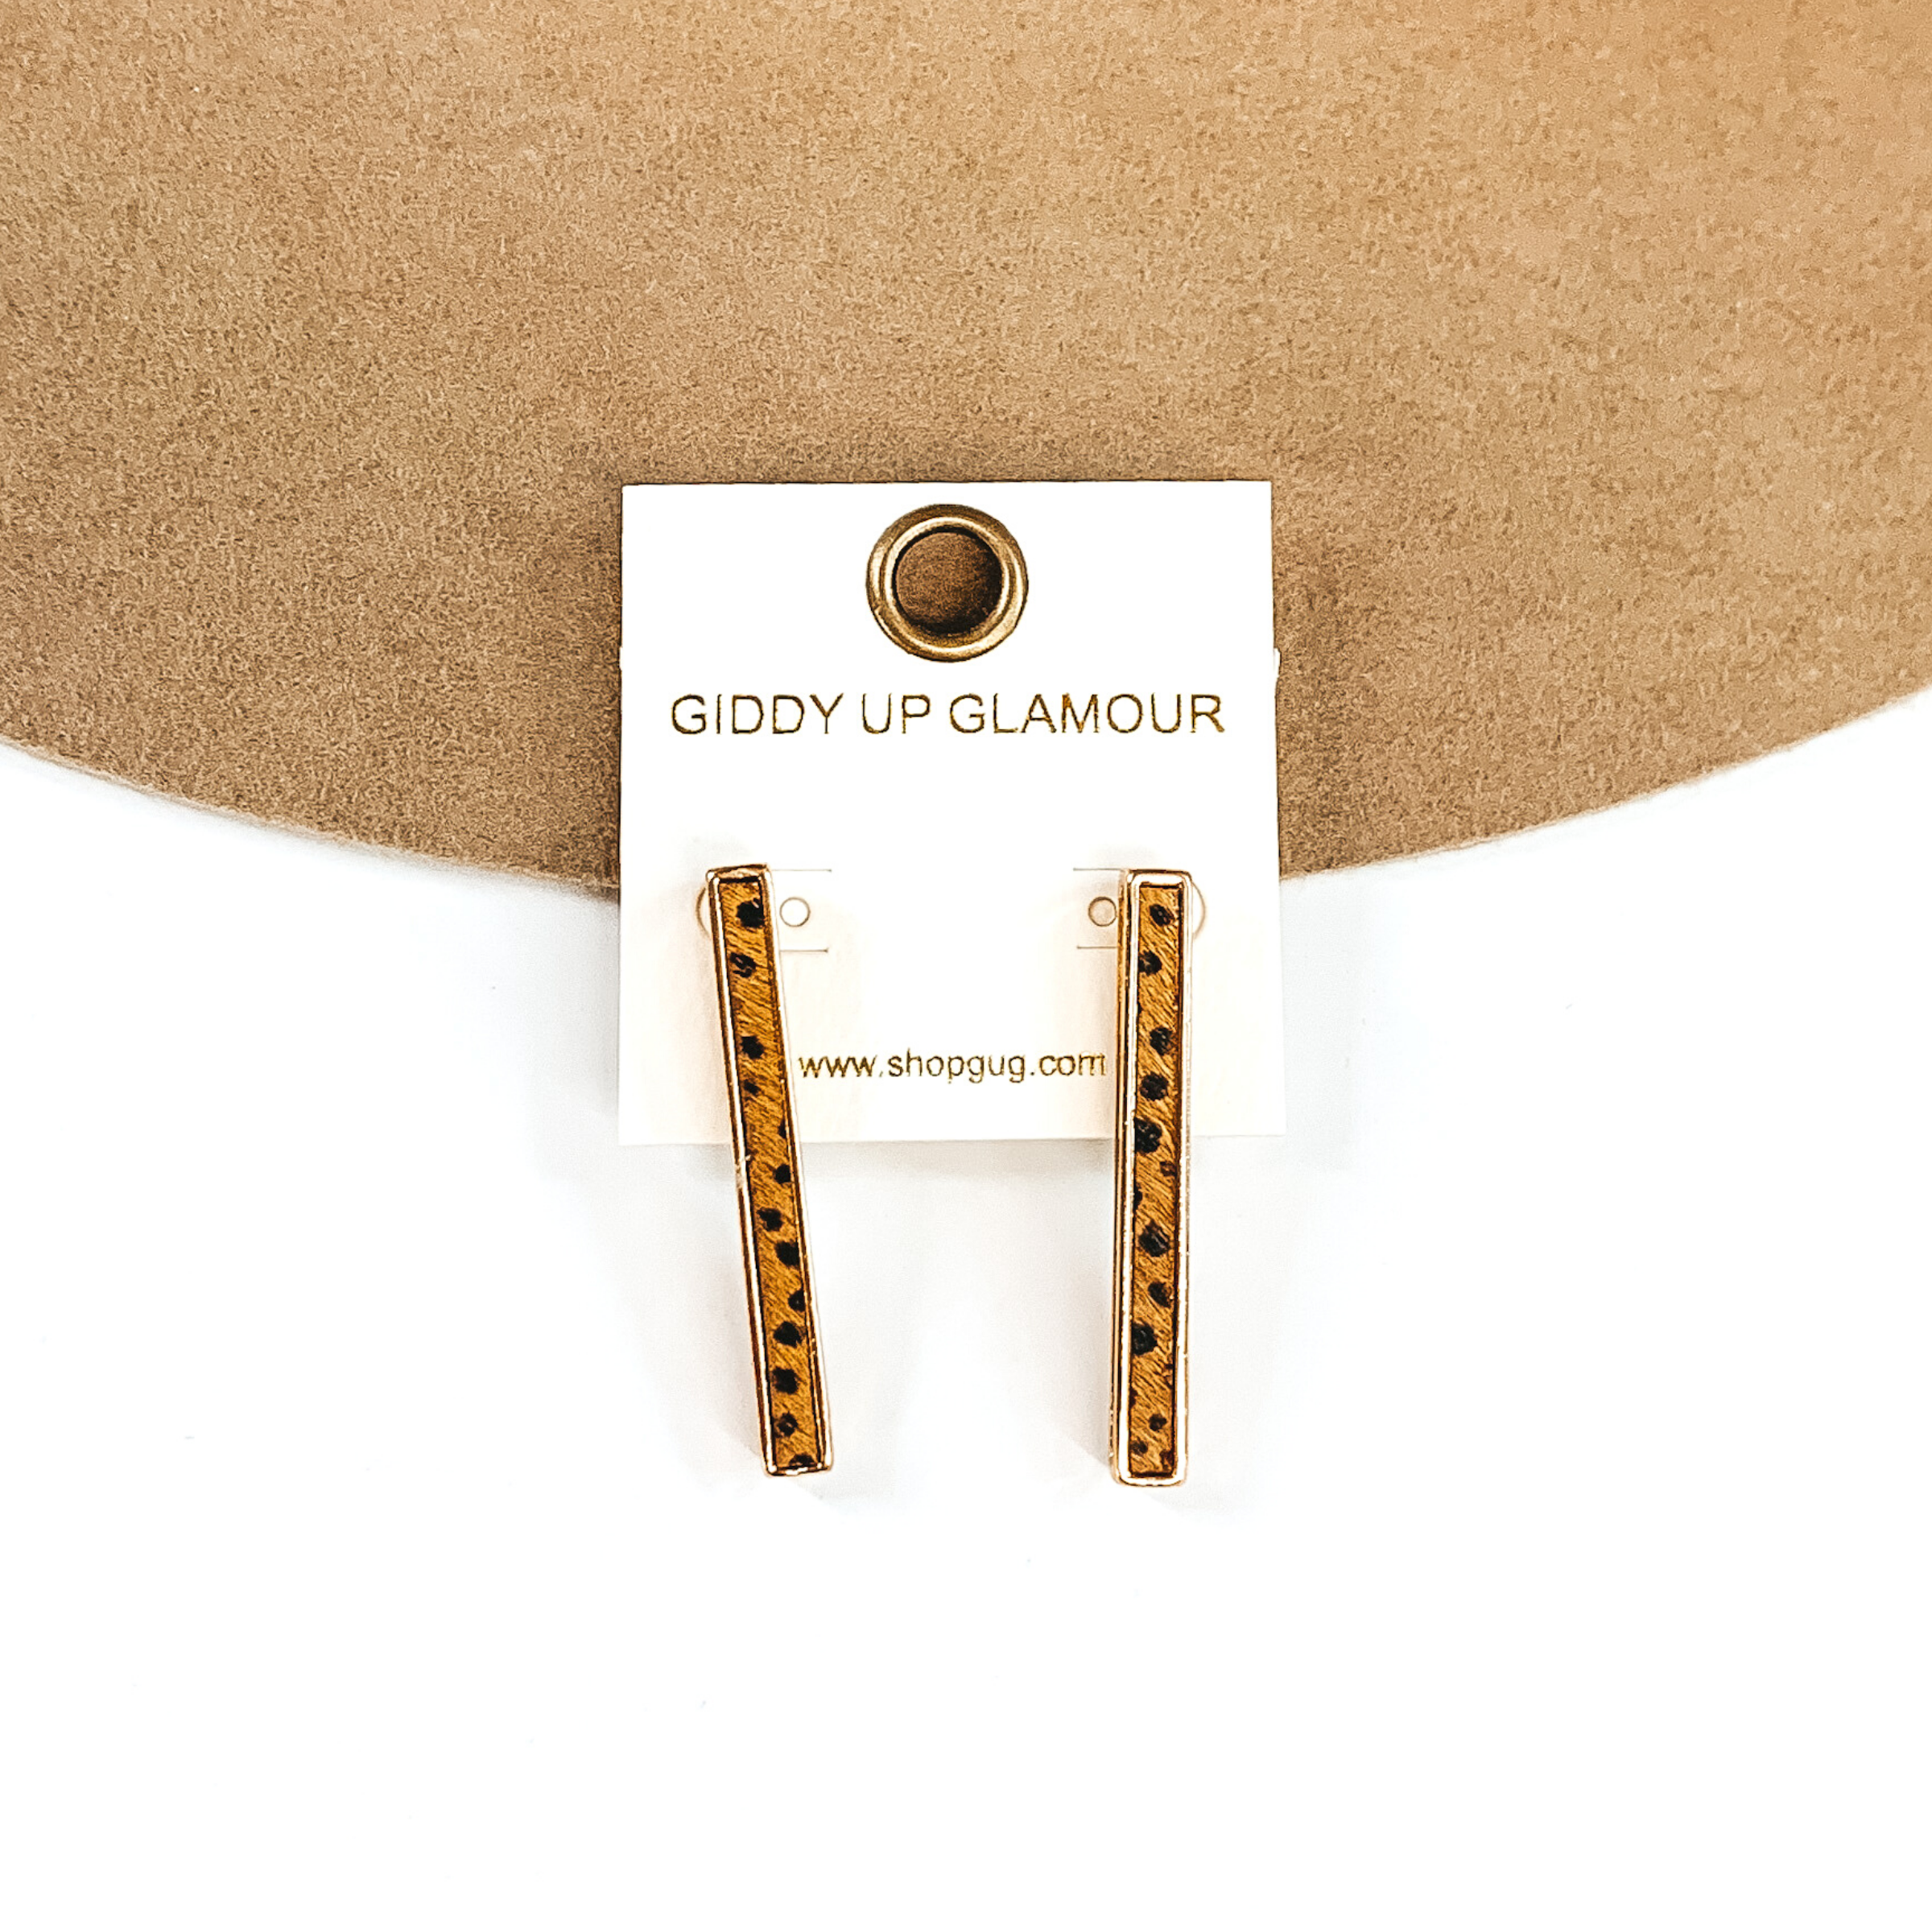 Gold rectangle bar earrings with a brown dotted inlay on a white earrings holder. These earrings are pictured on a white and tan background.